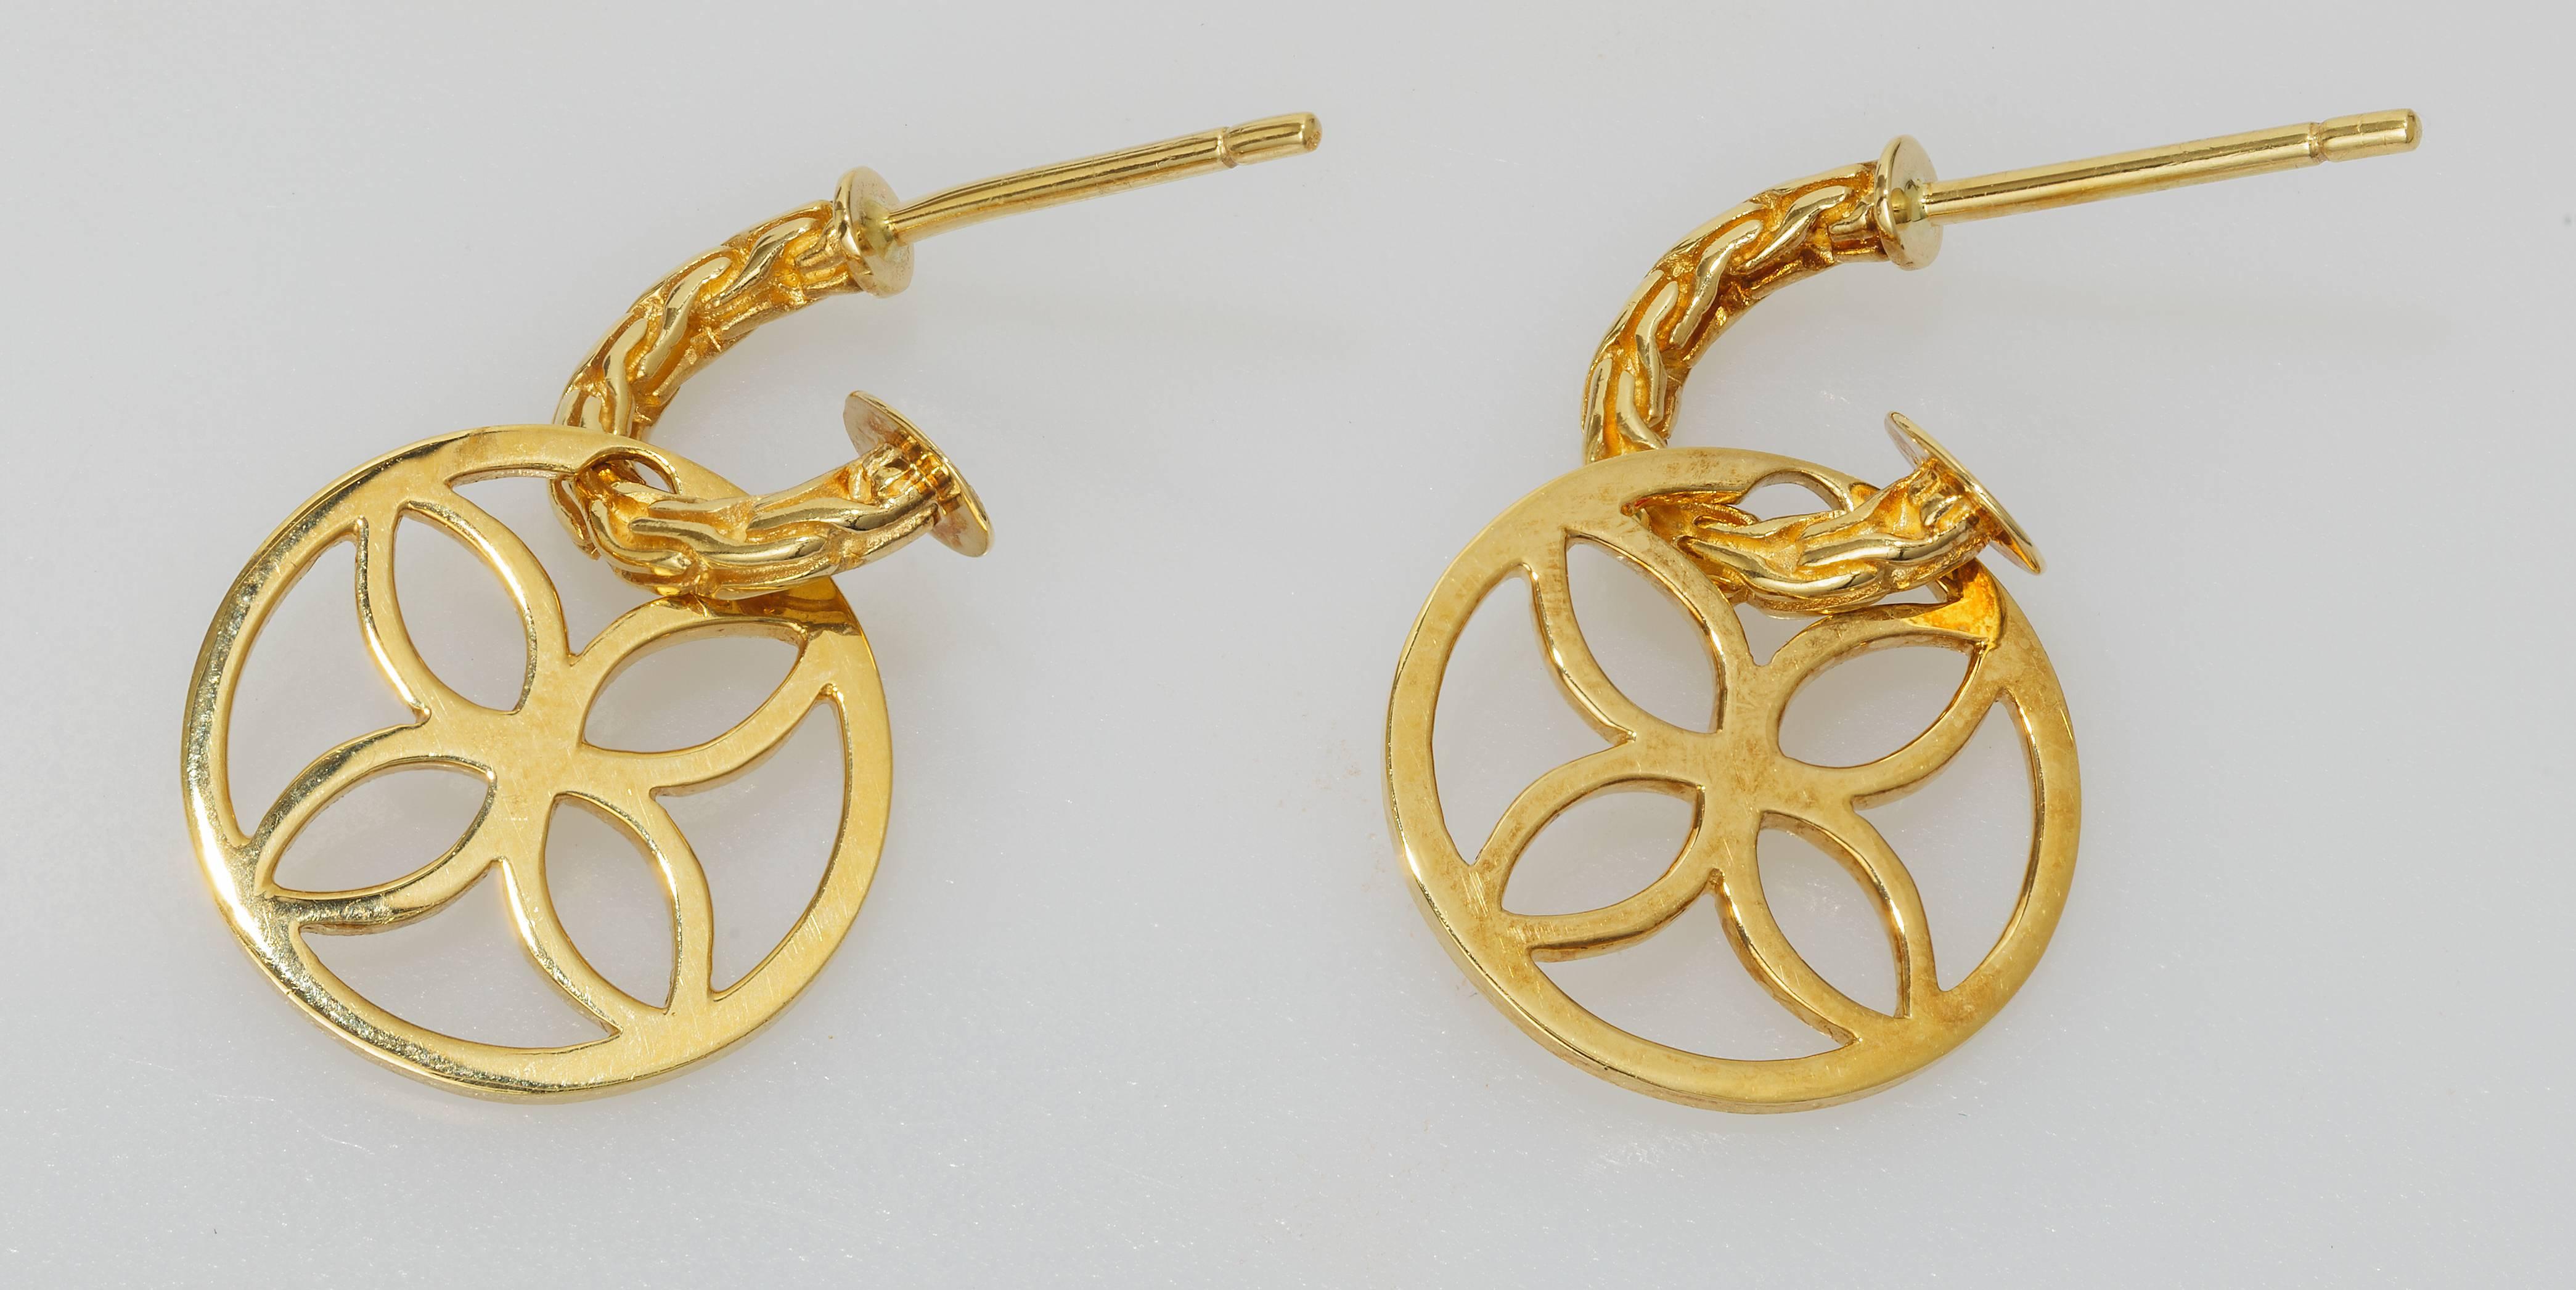 This pair of earrings is made of 18k yellow gold and sterling silver. Will come in a Zadok gift box.